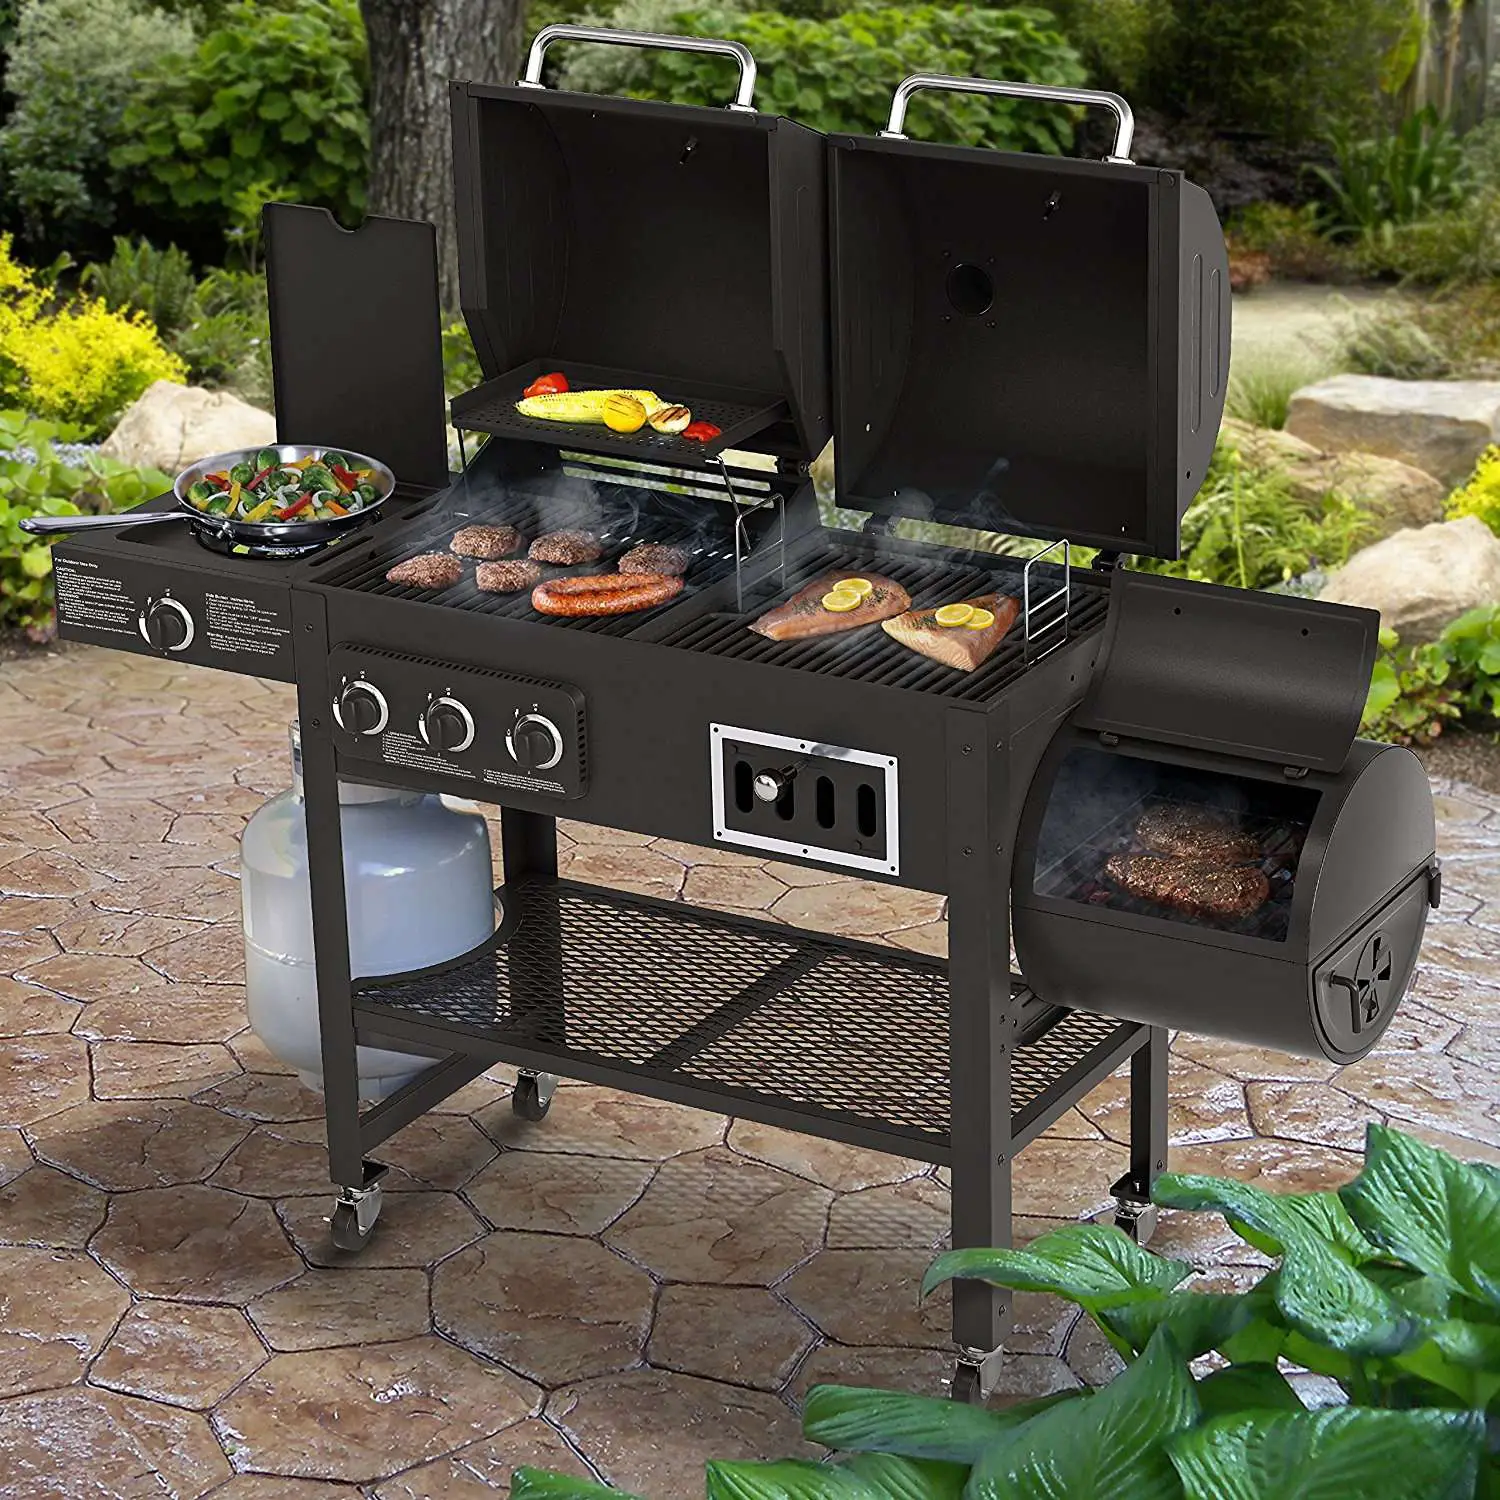 Top 3 gas charcoal smoker combo grills of 2018